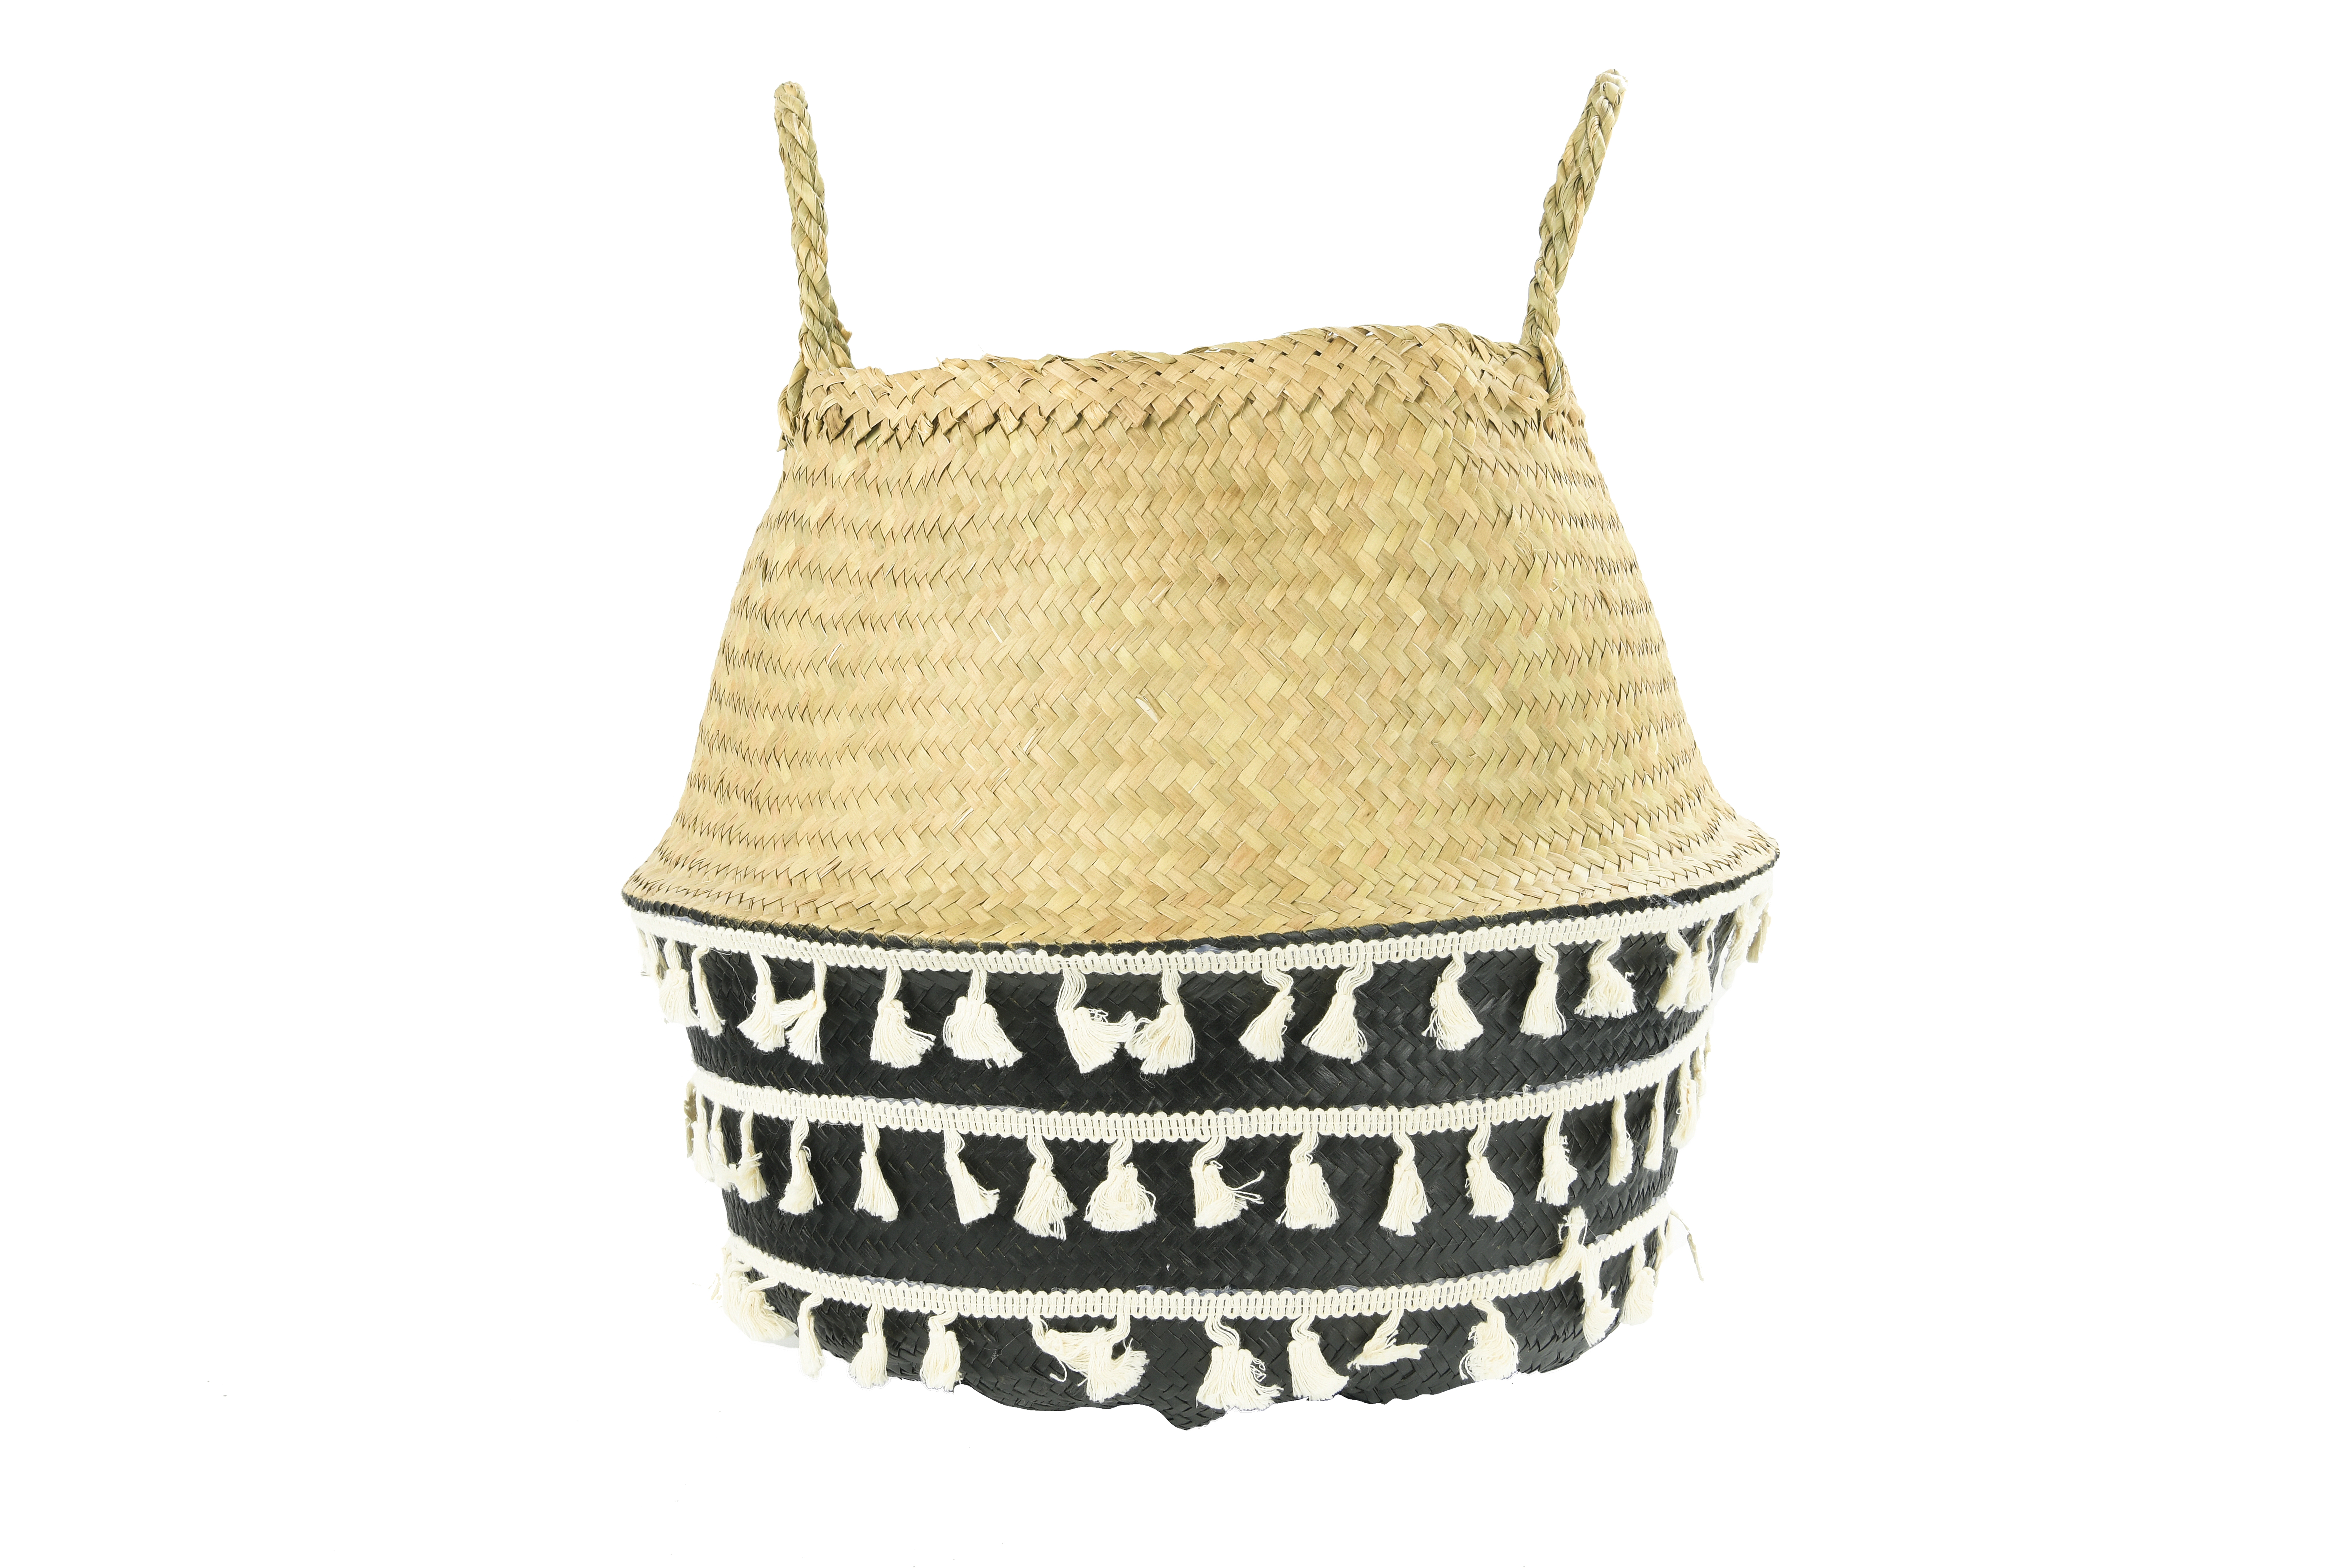 Beige & Black Natural Seagrass Collapsible Basket with Handles & White Tassels - Nomad Home